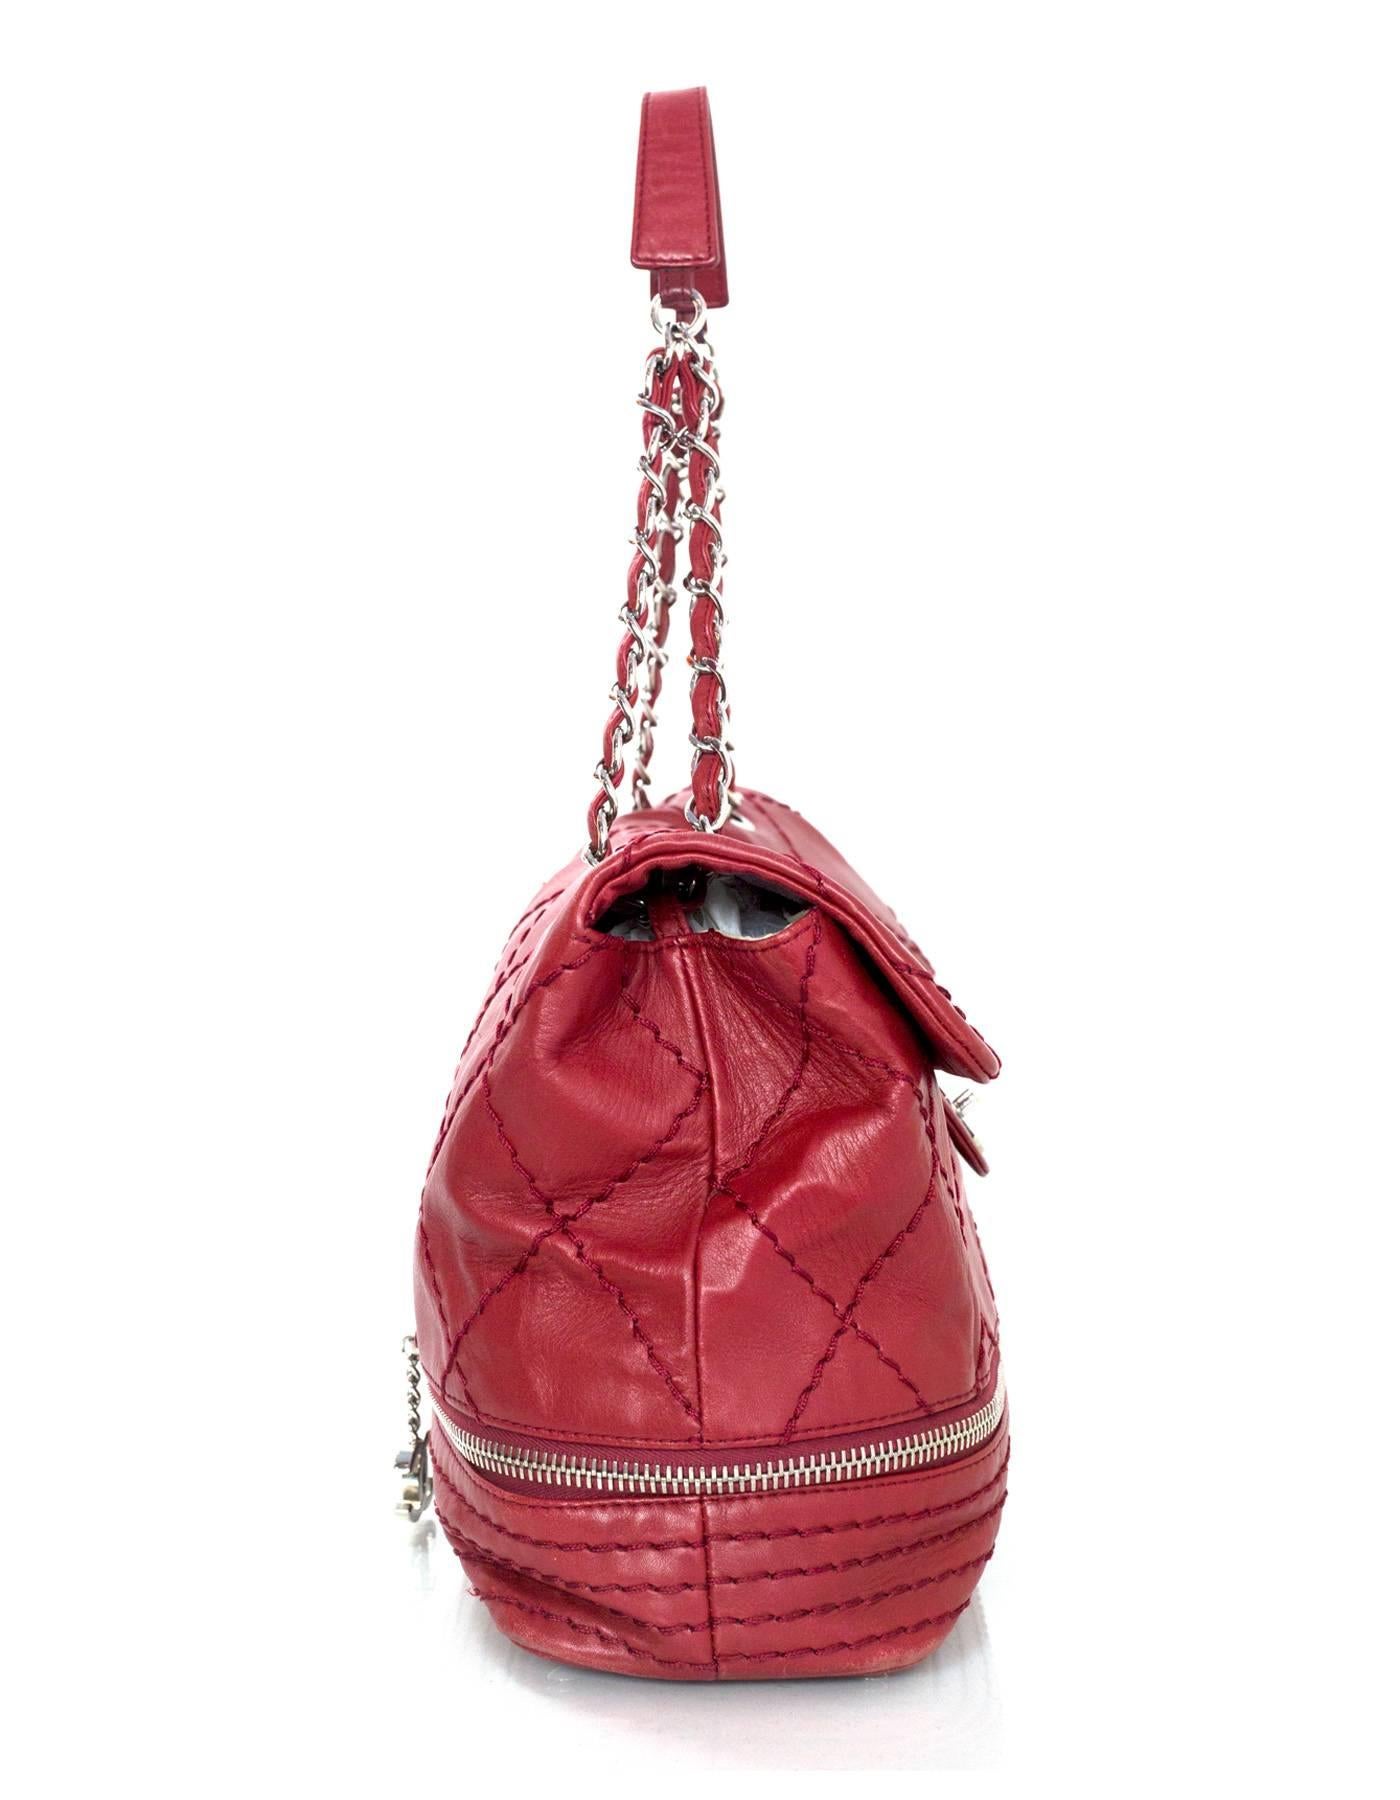 Chanel Red Expandable Ligne Quilted Zipper Flap Bag
Features expandable bottom with zip around 

Made In: France
Year of Production: 2006-2008
Color: Red
Hardware: Silvertone
Materials: Leather
Lining: Beige canvas
Closure/Opening: Flap top with CC